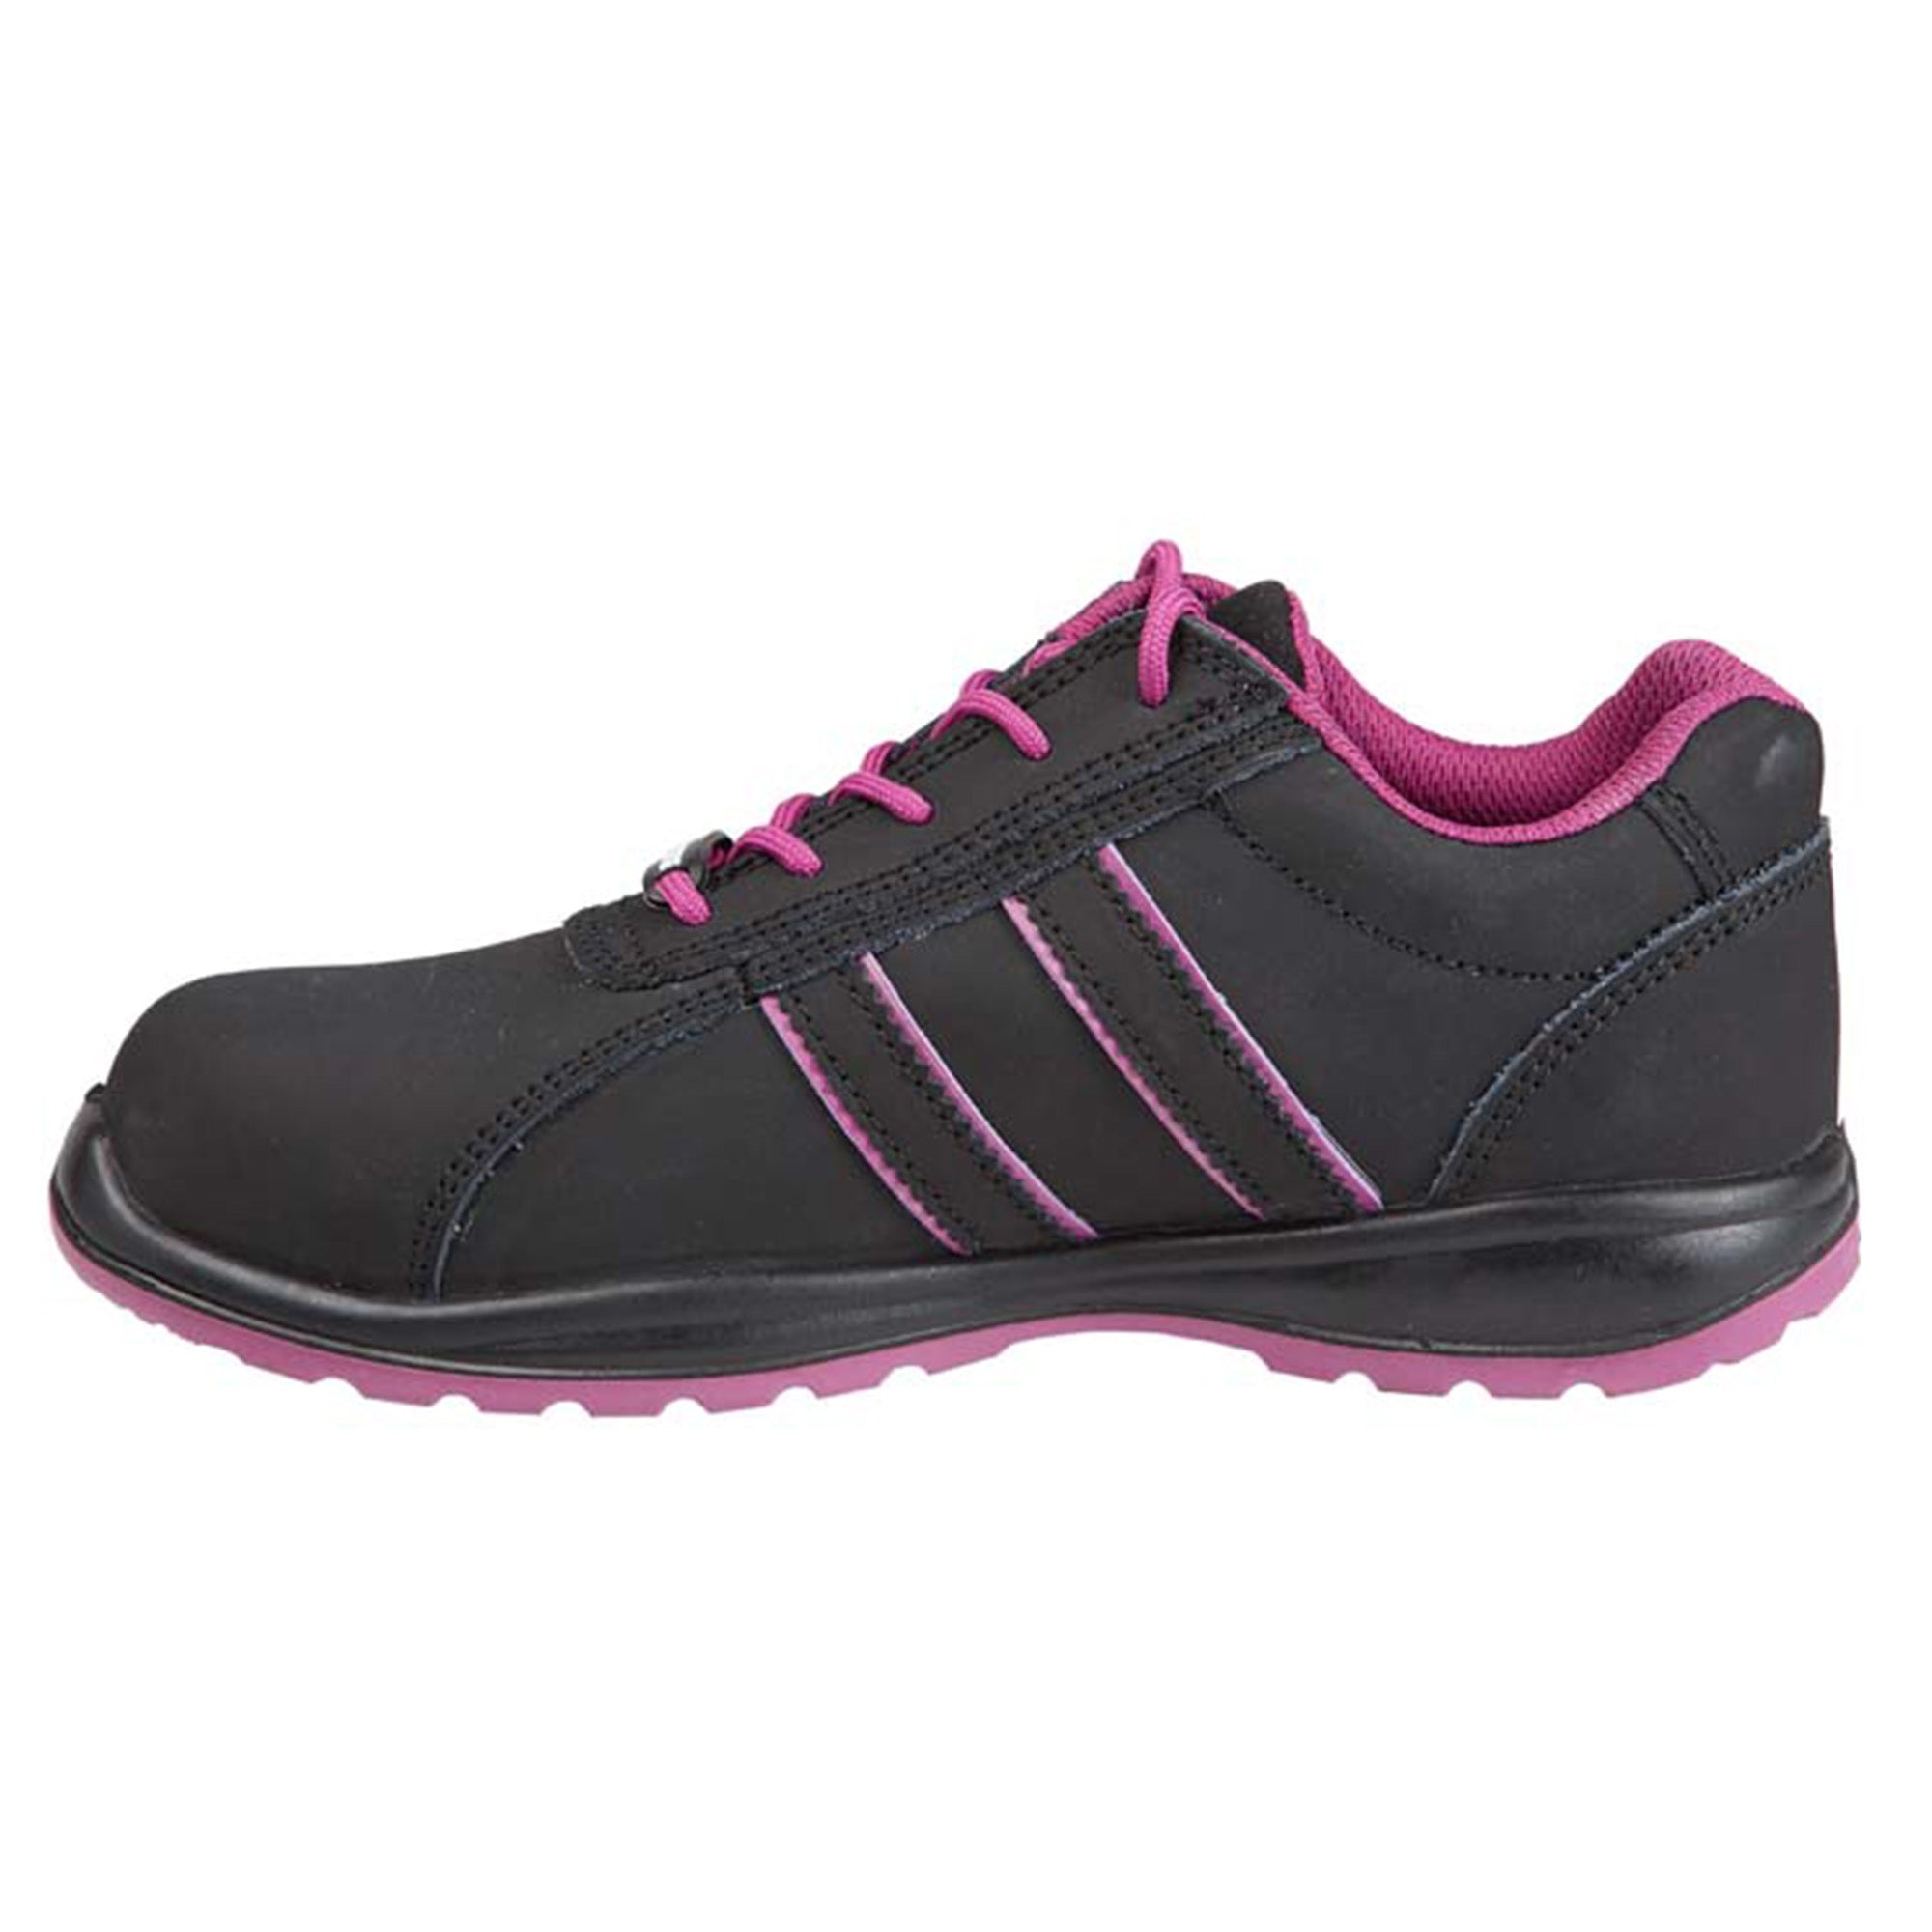 ALIZEE - LOW SAFETY SHOES - 7011 | Black